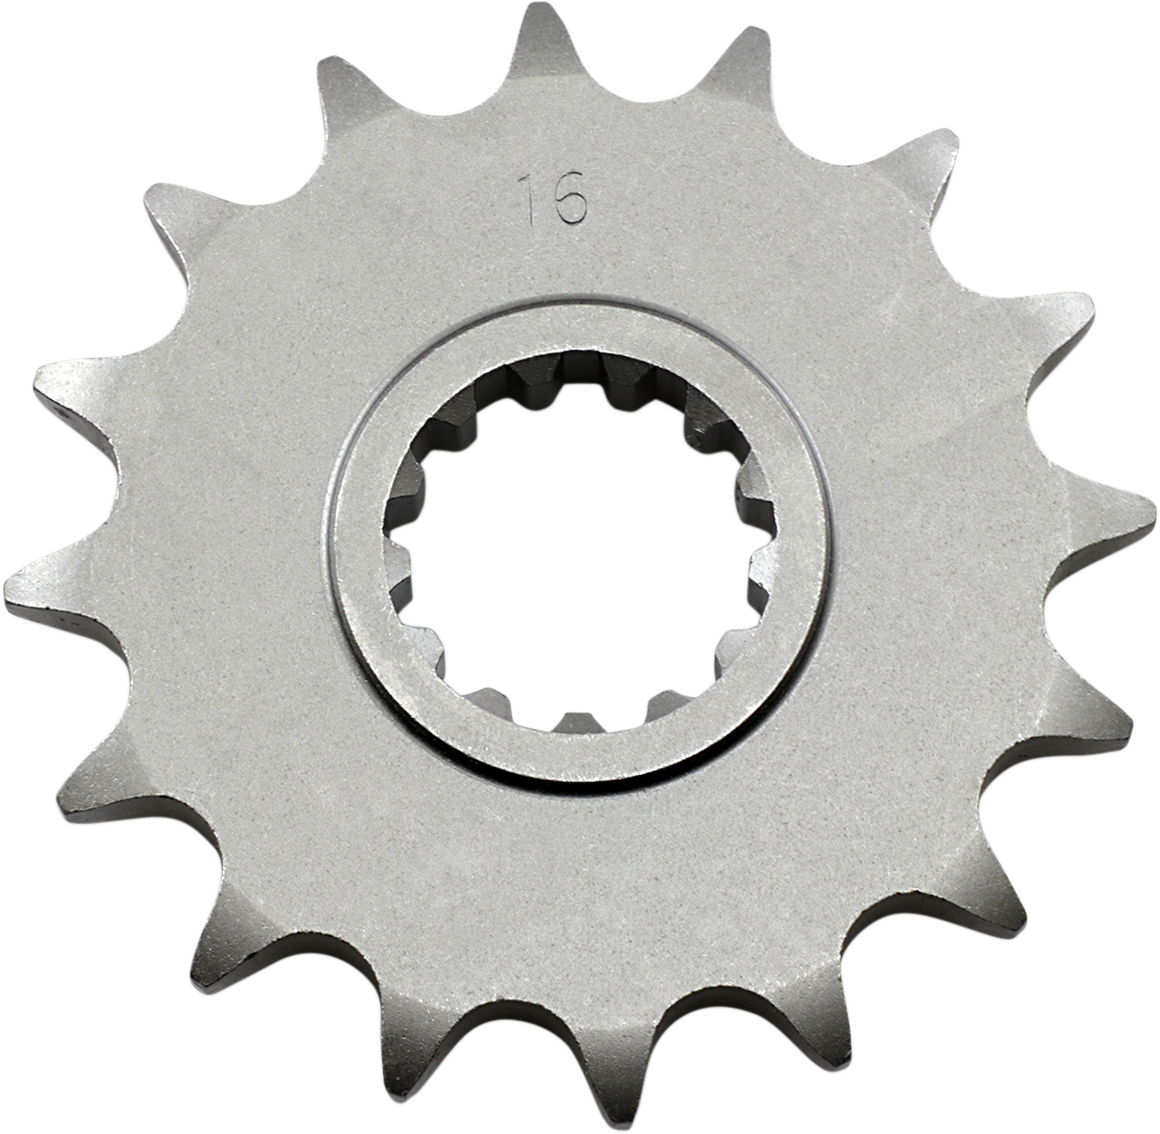 Parts Unlimited Countershaft Sprocket - 15-Tooth 4xv-17460-52015